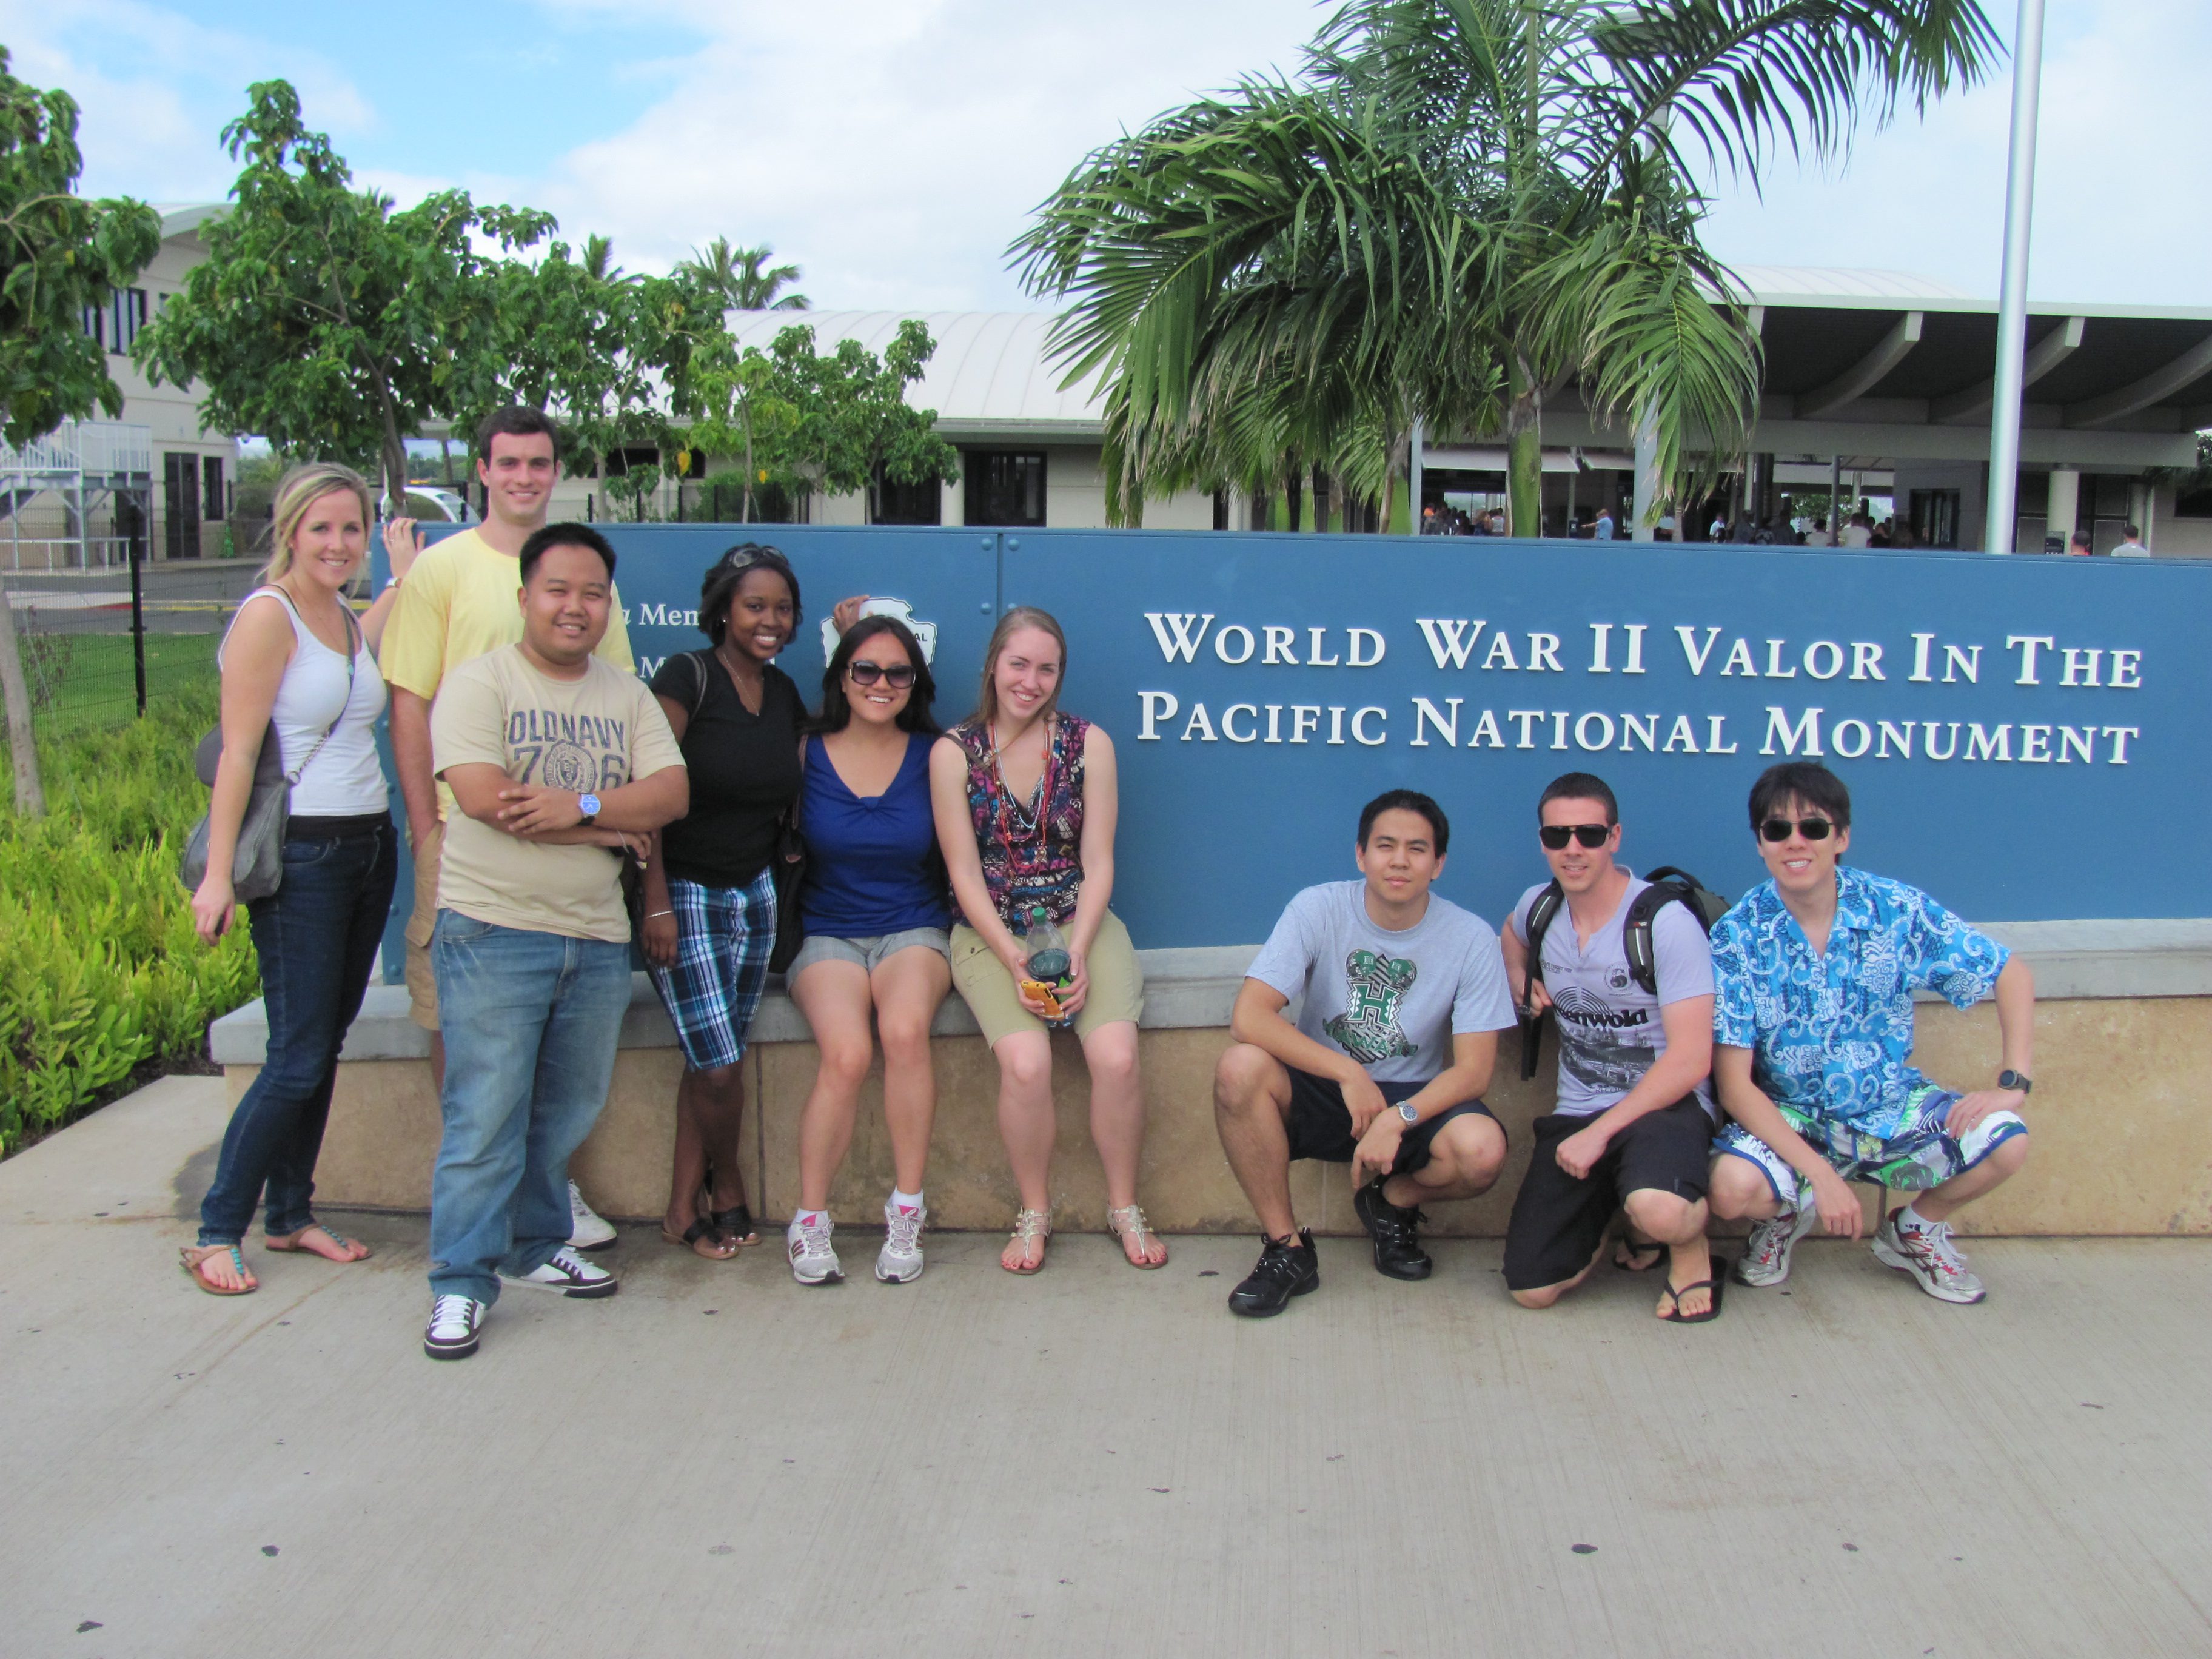 A visit to the Pearl Harbor Memorial